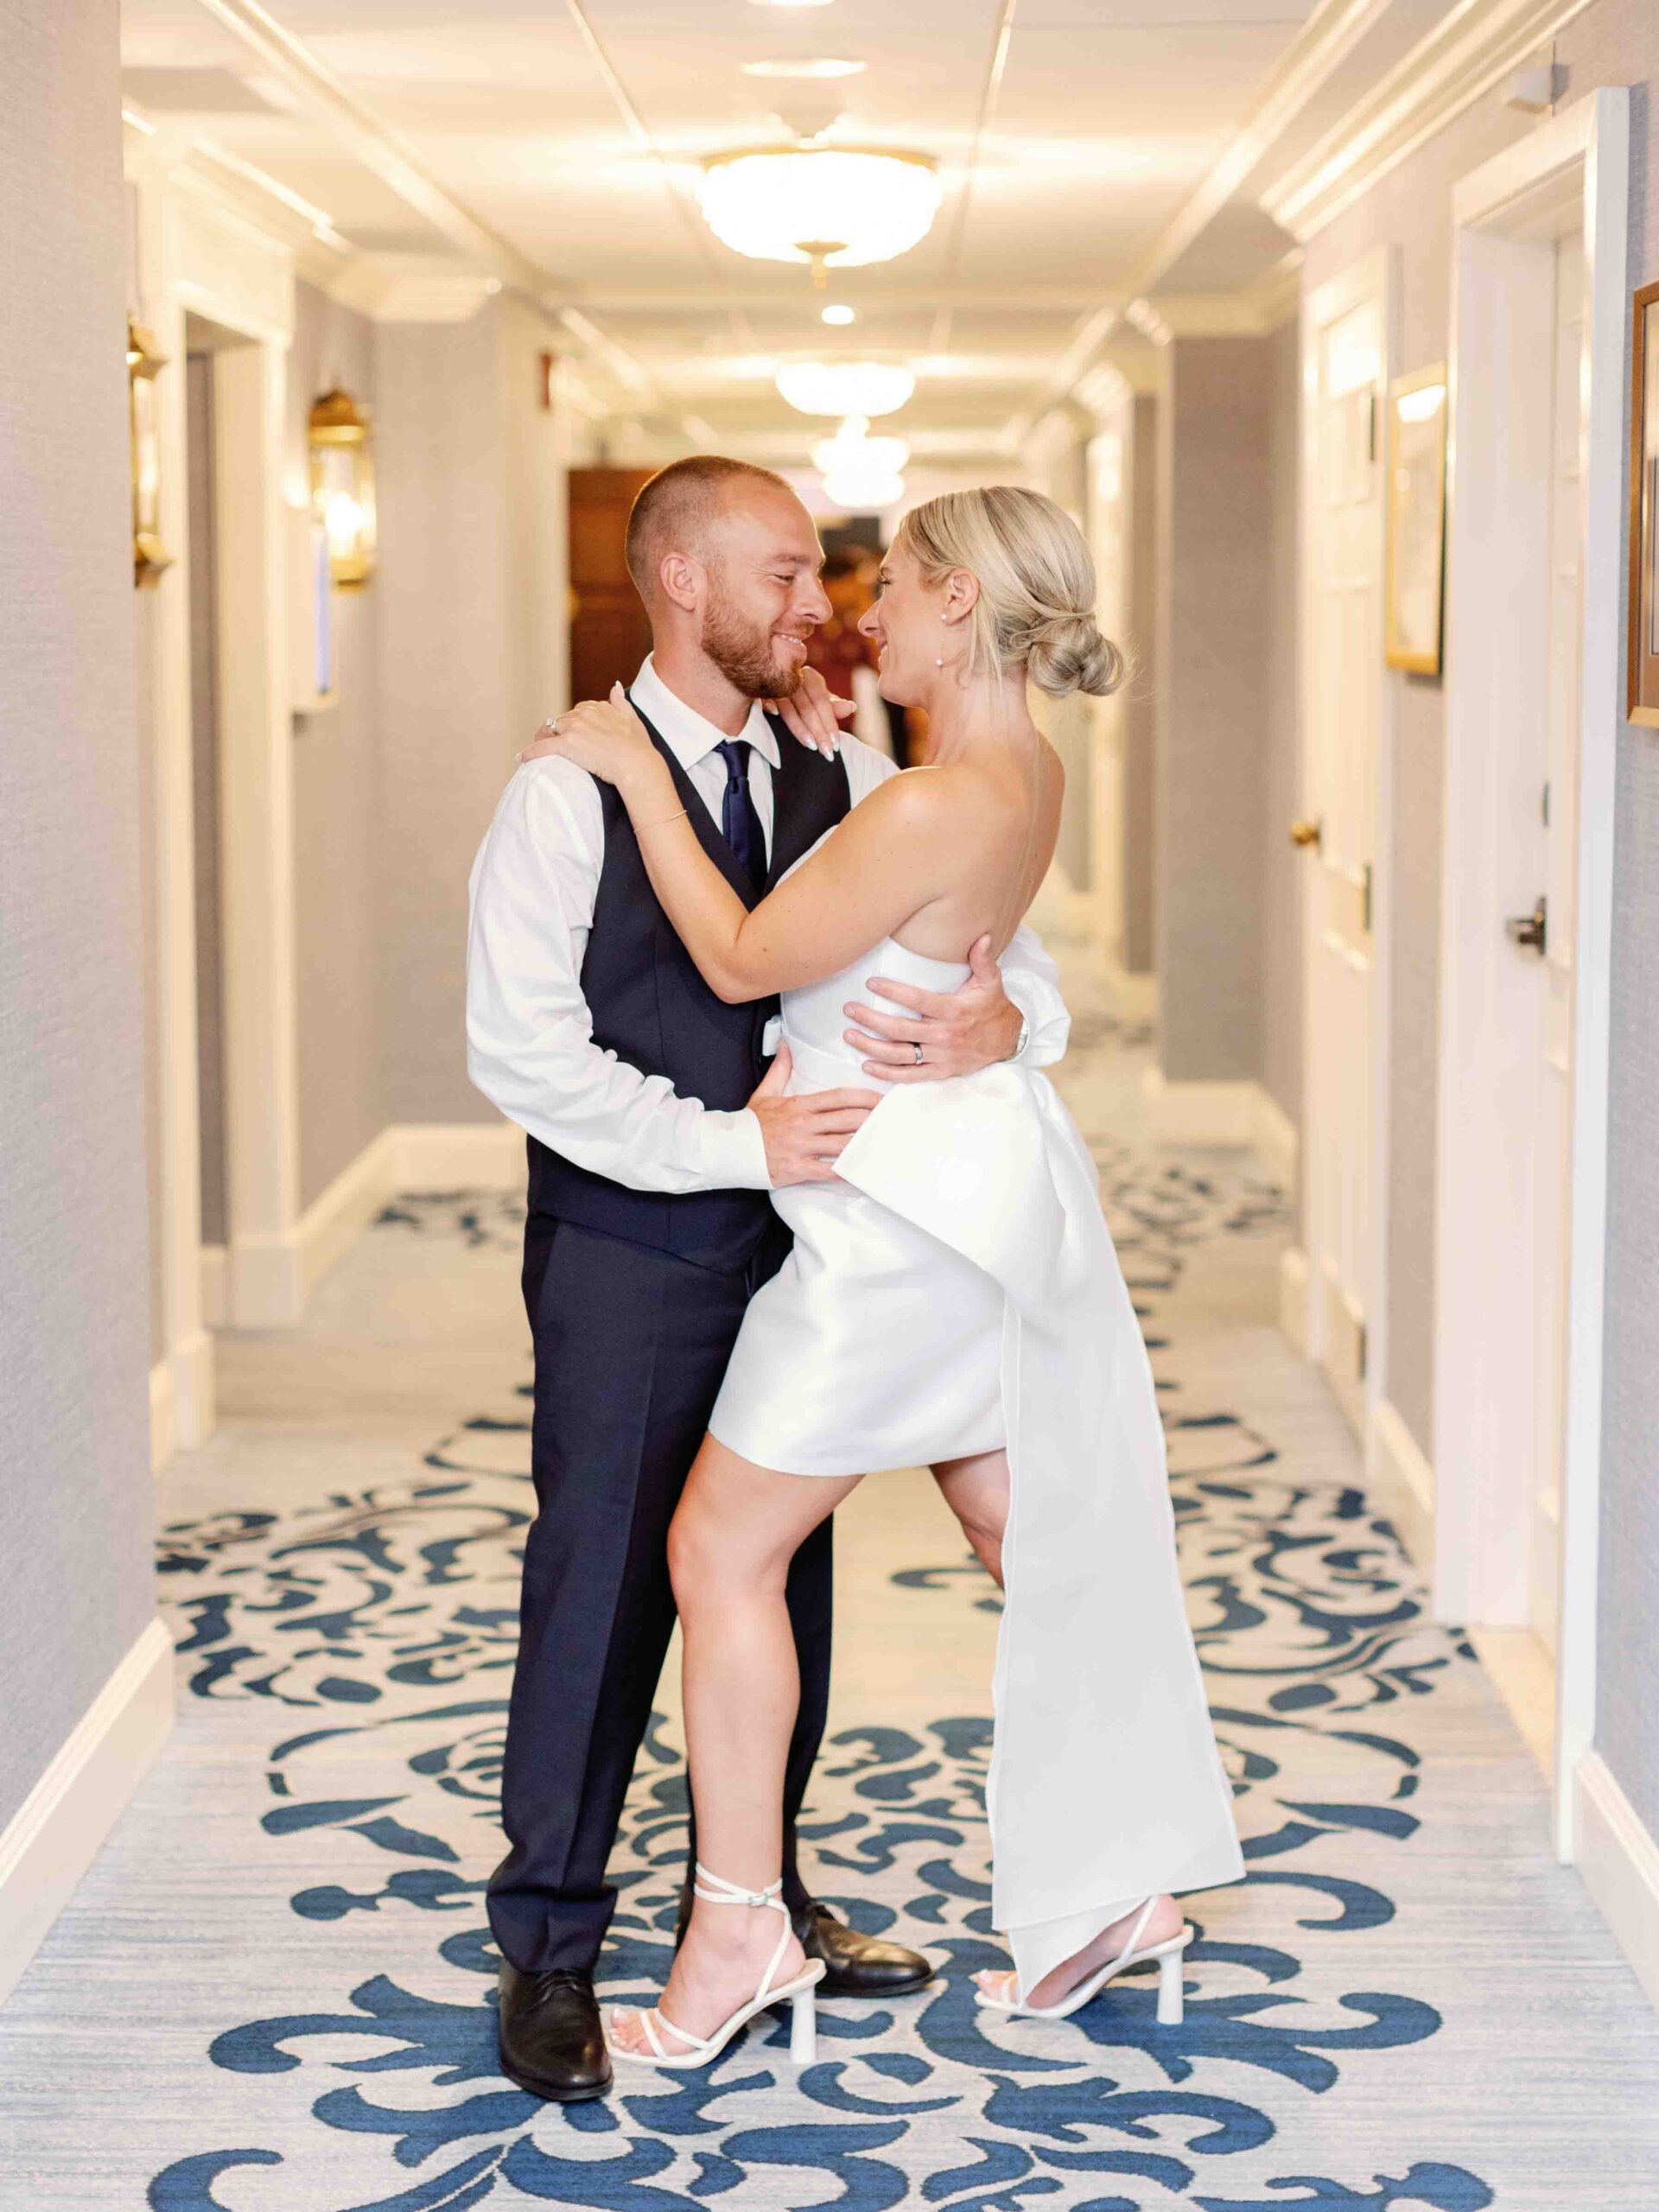 Bride and groom embracing in a hotel hallway